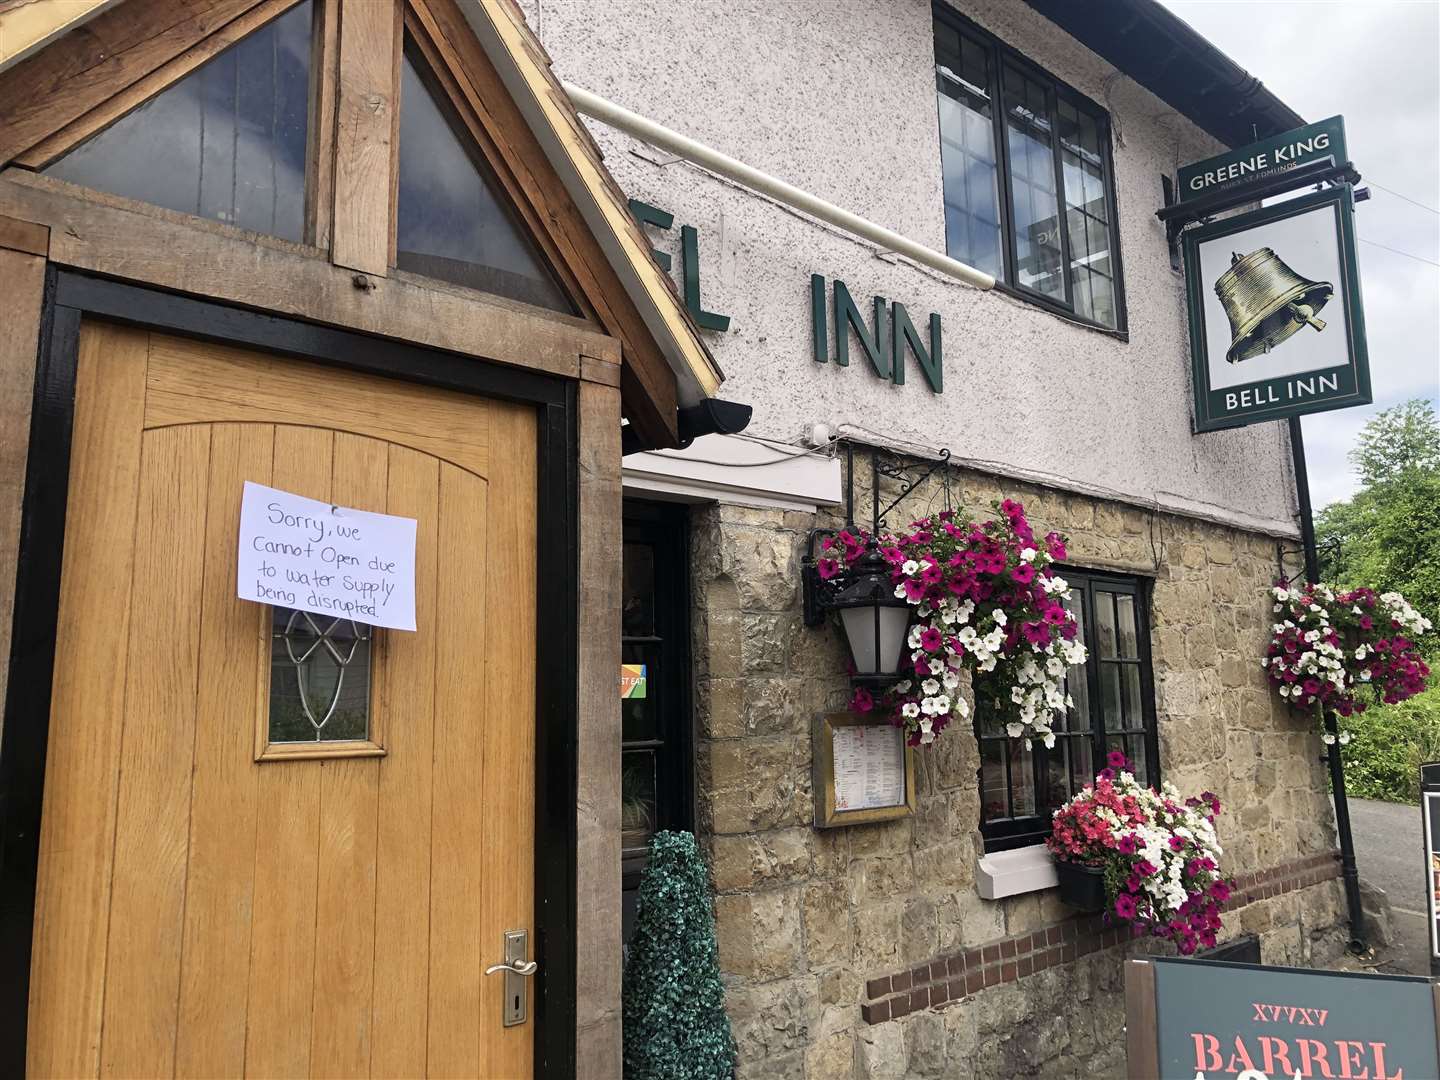 The Bell Inn was closed on Sunday (13836059)